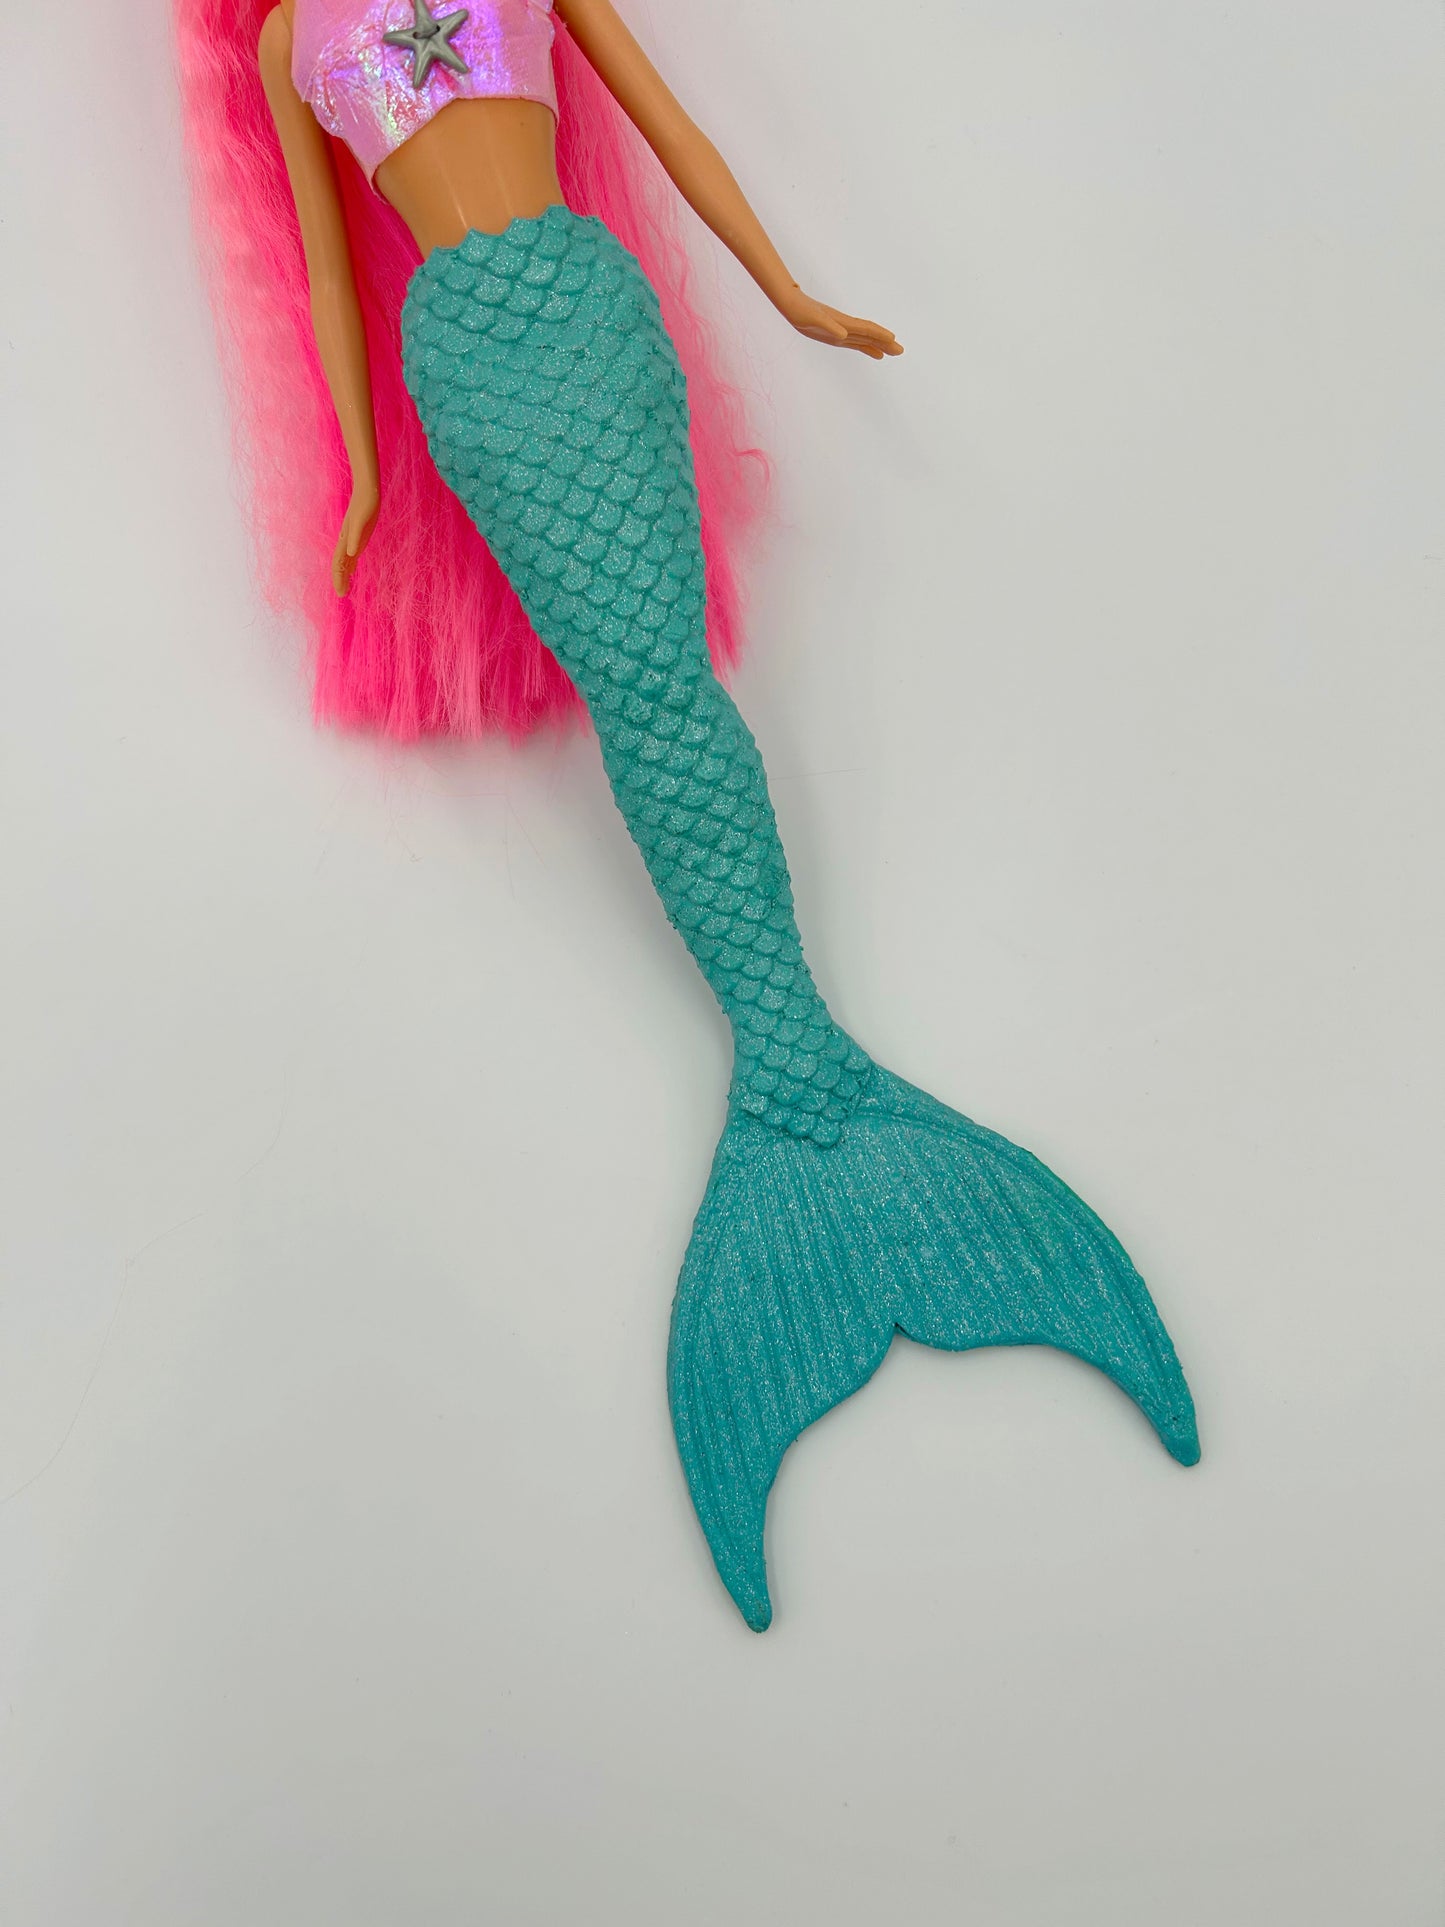 Fantasy silicone mermaid tail for doll  (doll not included)